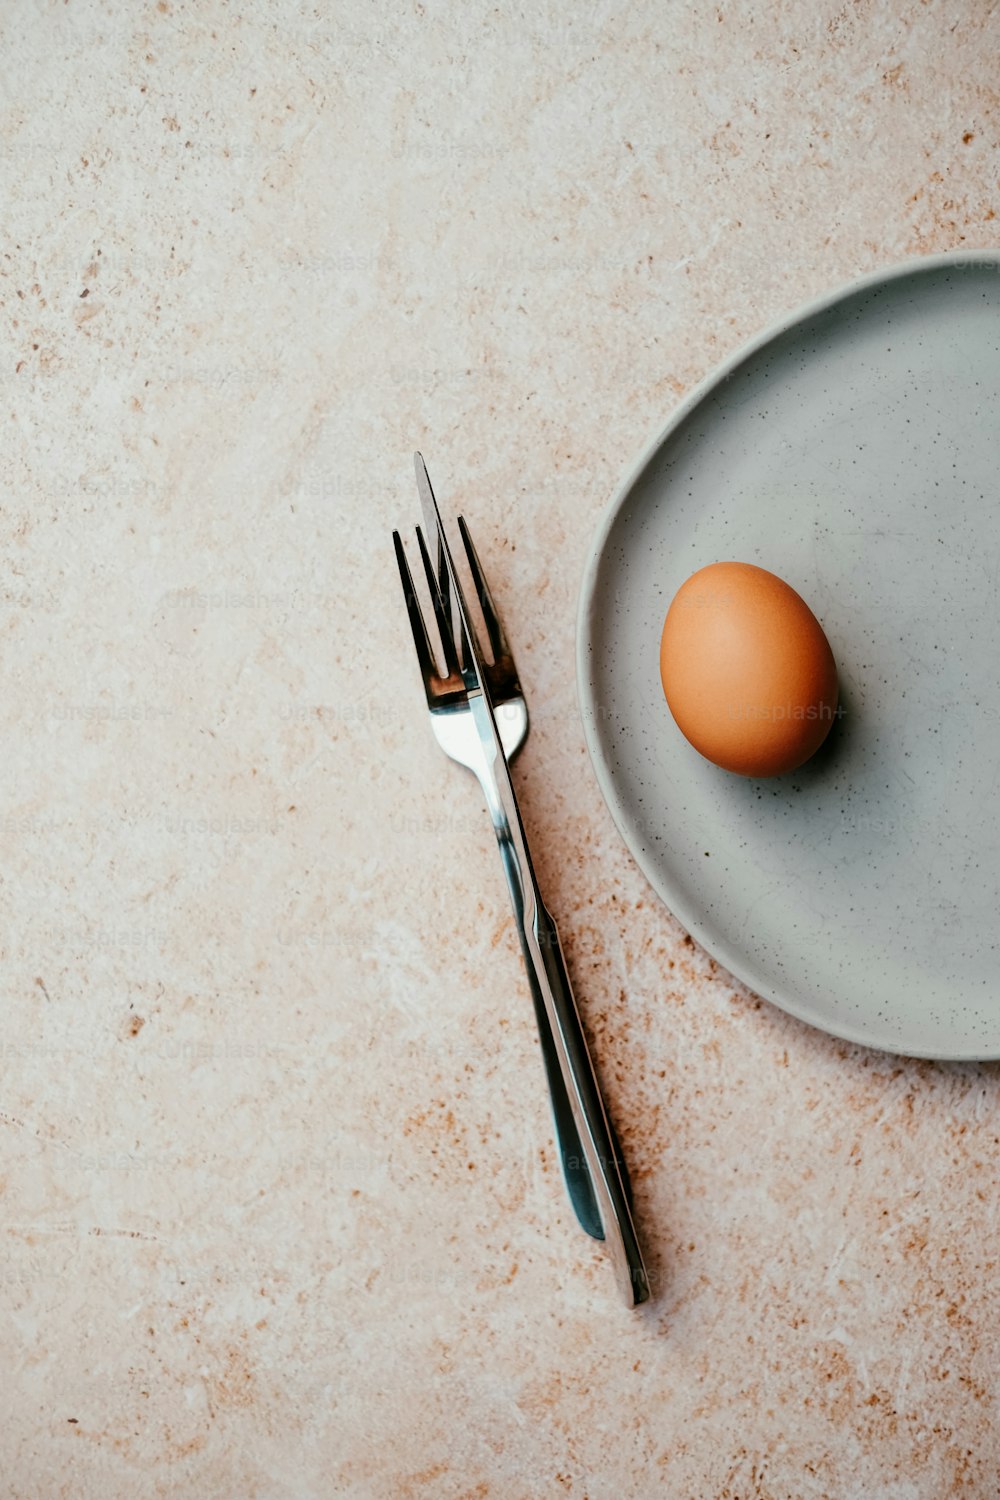 a plate with a fork and an egg on it